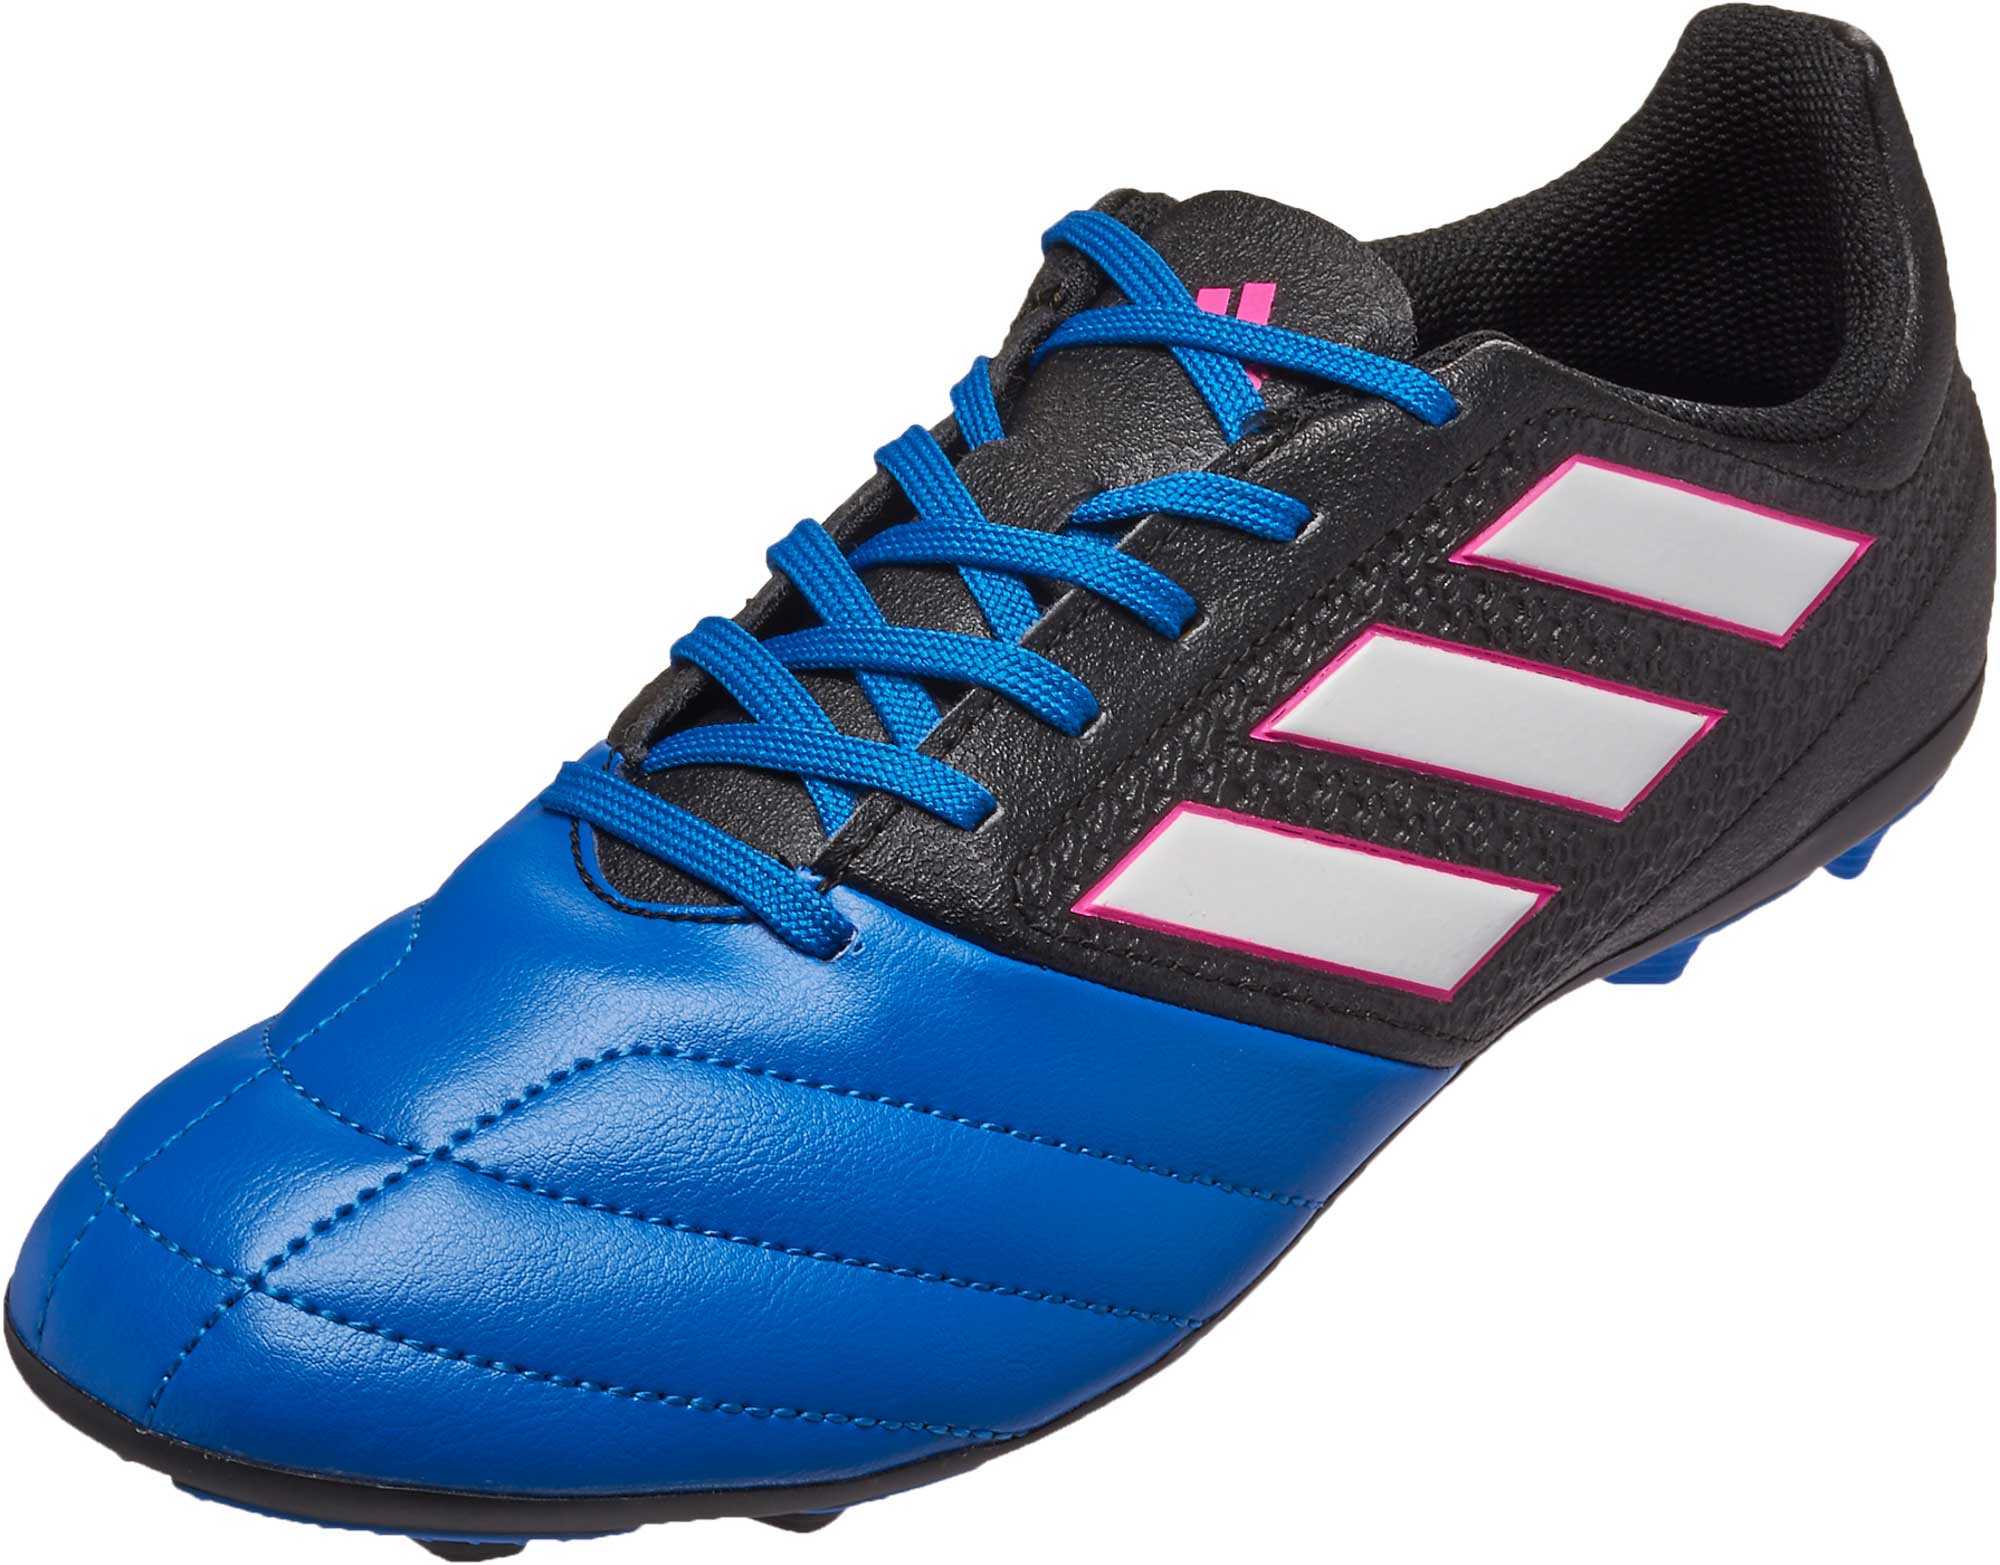 adidas ace 17.4 junior indoor soccer shoes